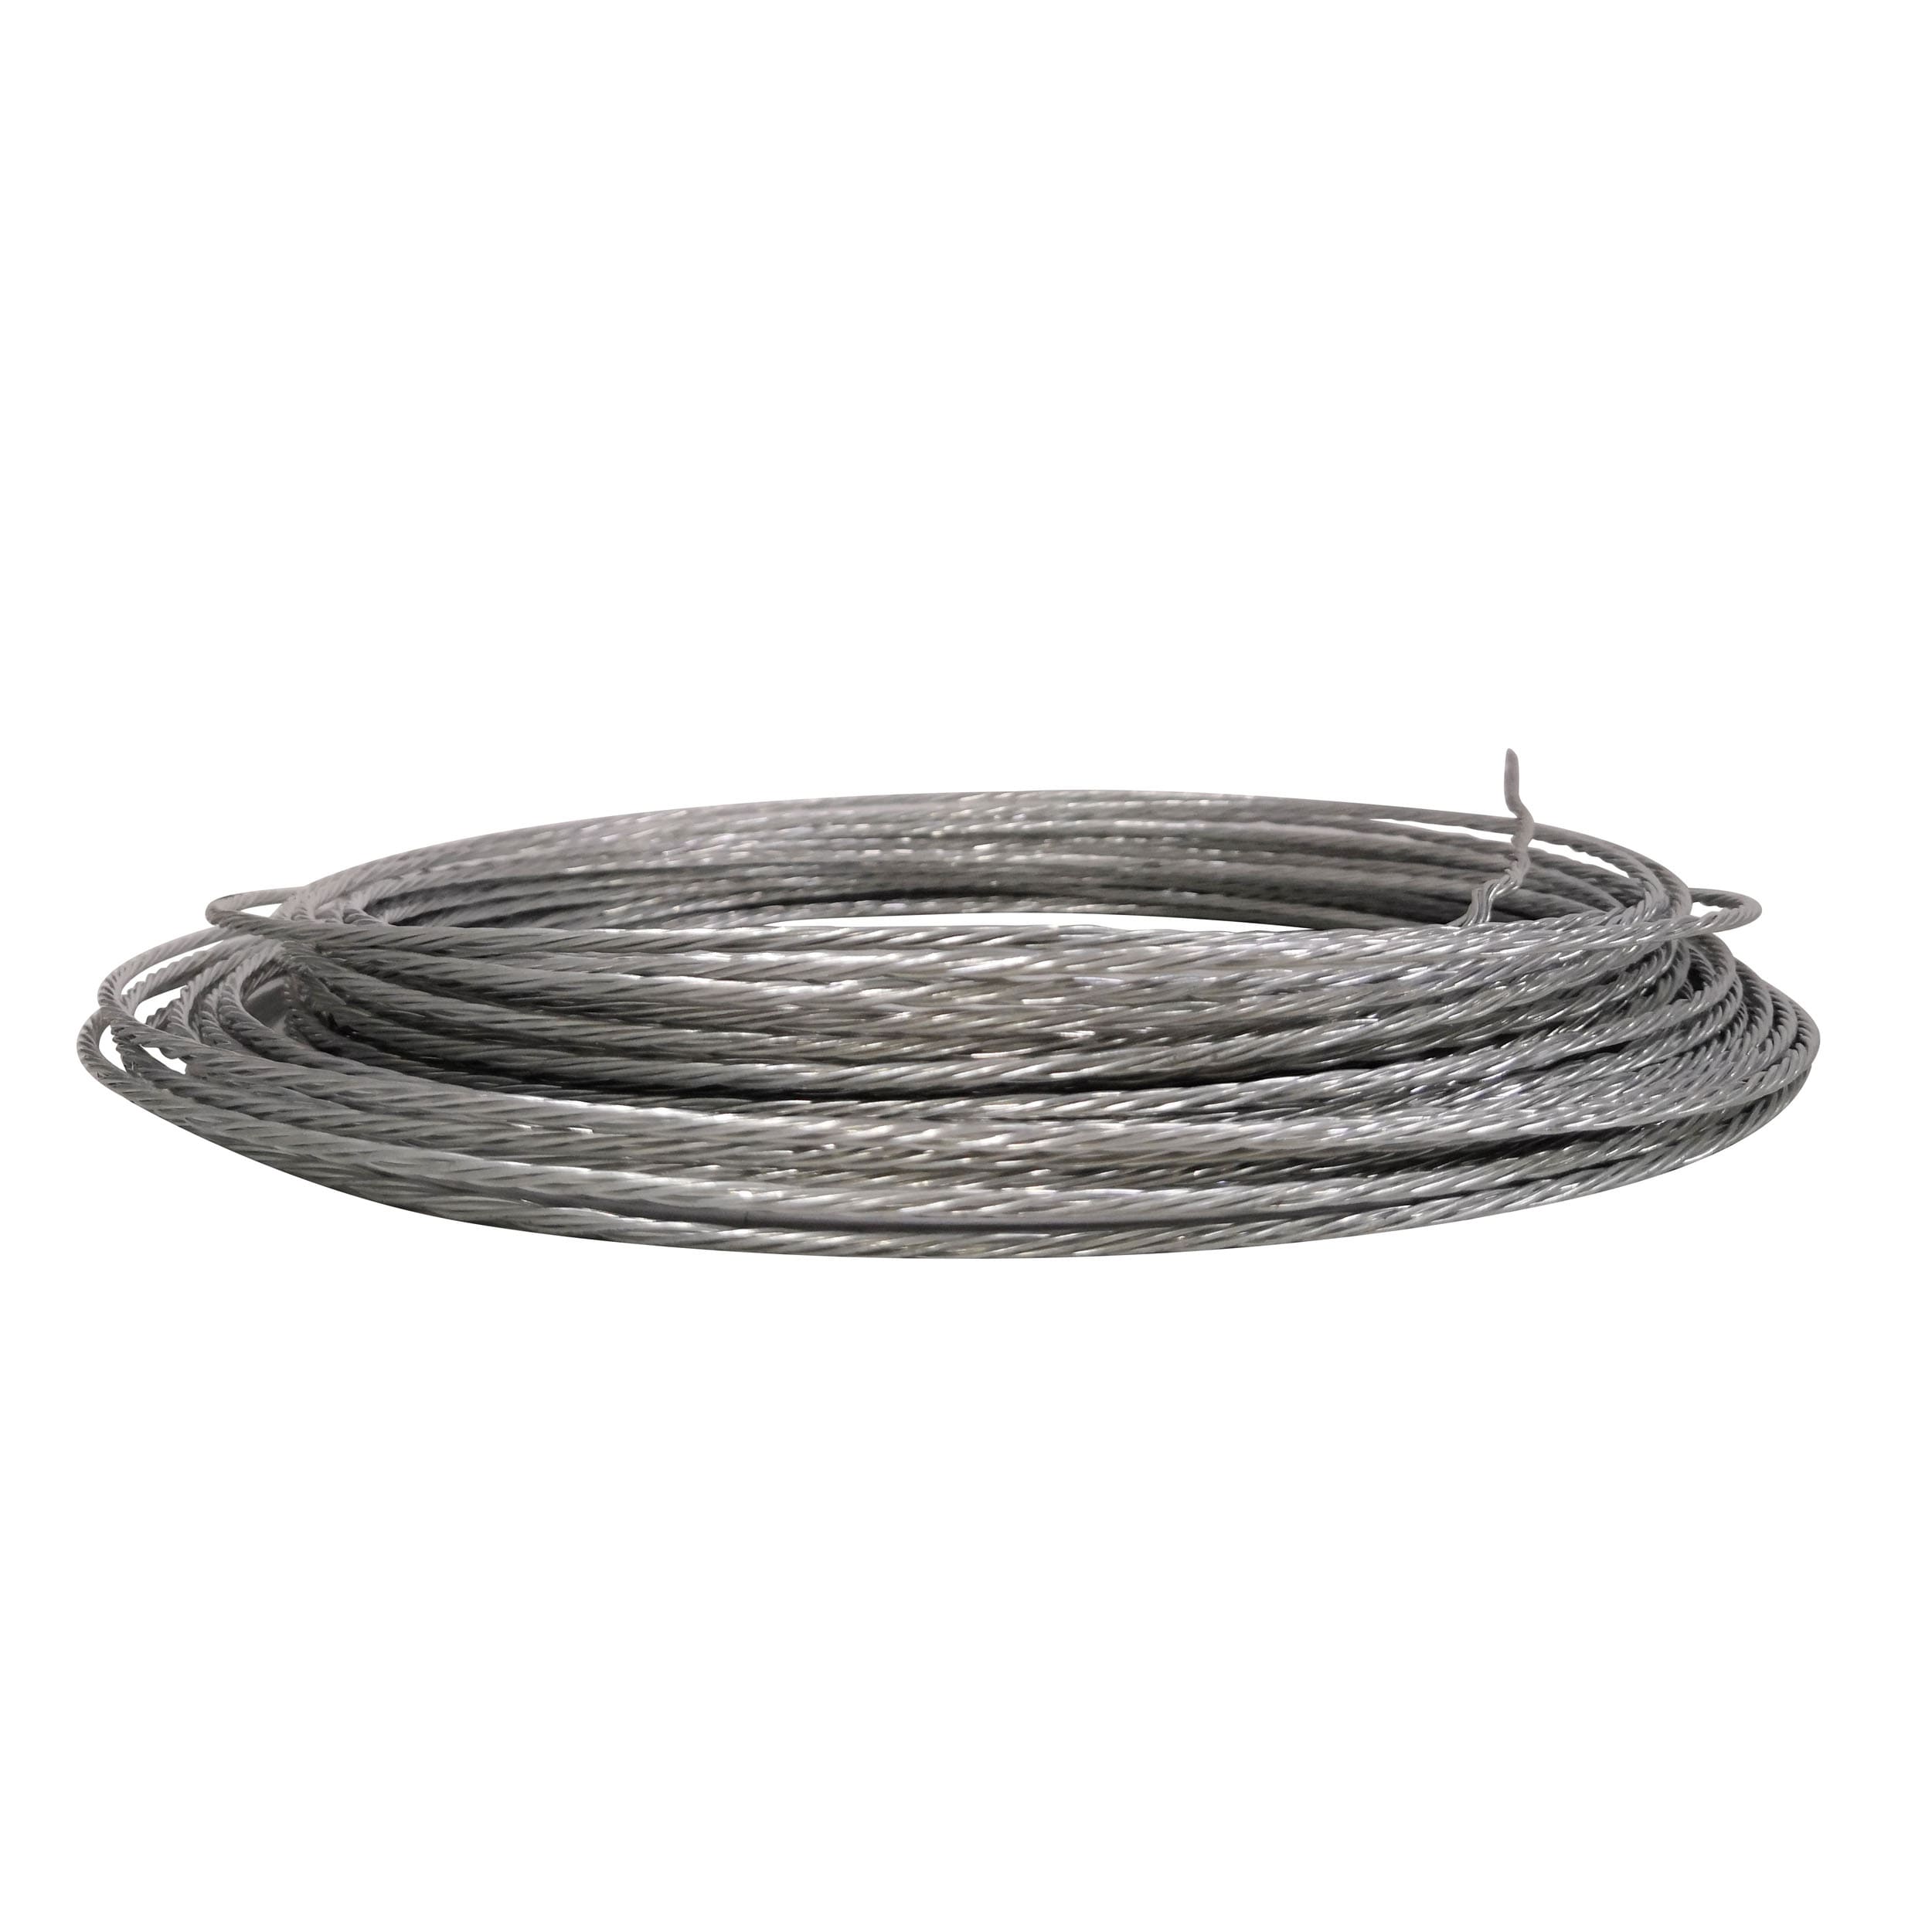 OOK 50120 Picture Hanging Wire, 9 ft L, Galvanized Steel, 5 lb 12